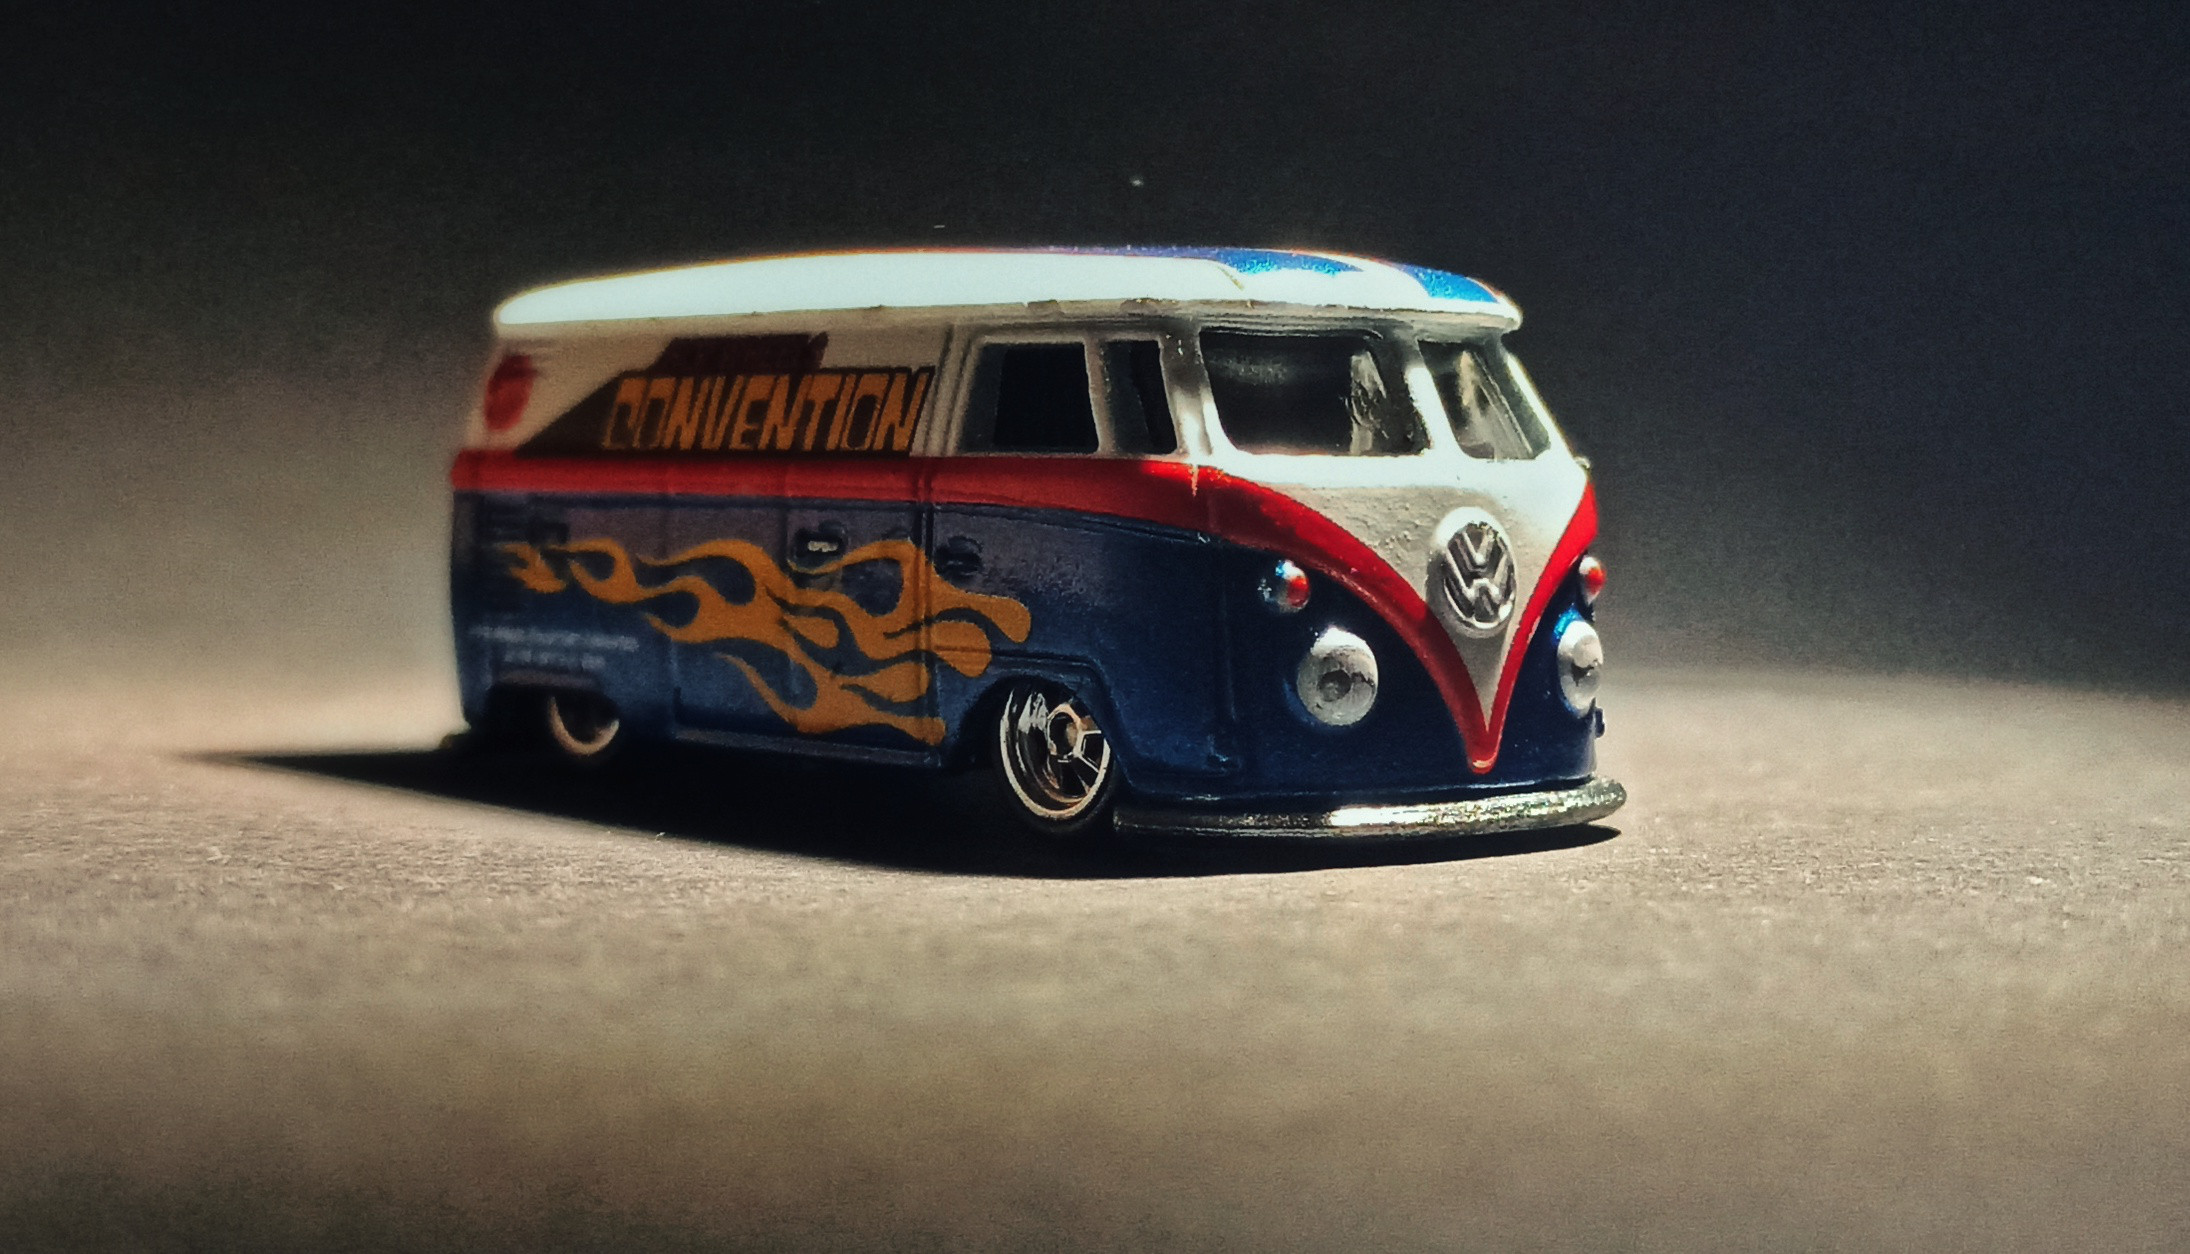 Hot Wheels Volkswagen T1 Panel Bus VW (GLH80) 2020 34th Annual Collectors Convention (3/3) (1 of 4.500) blue & white